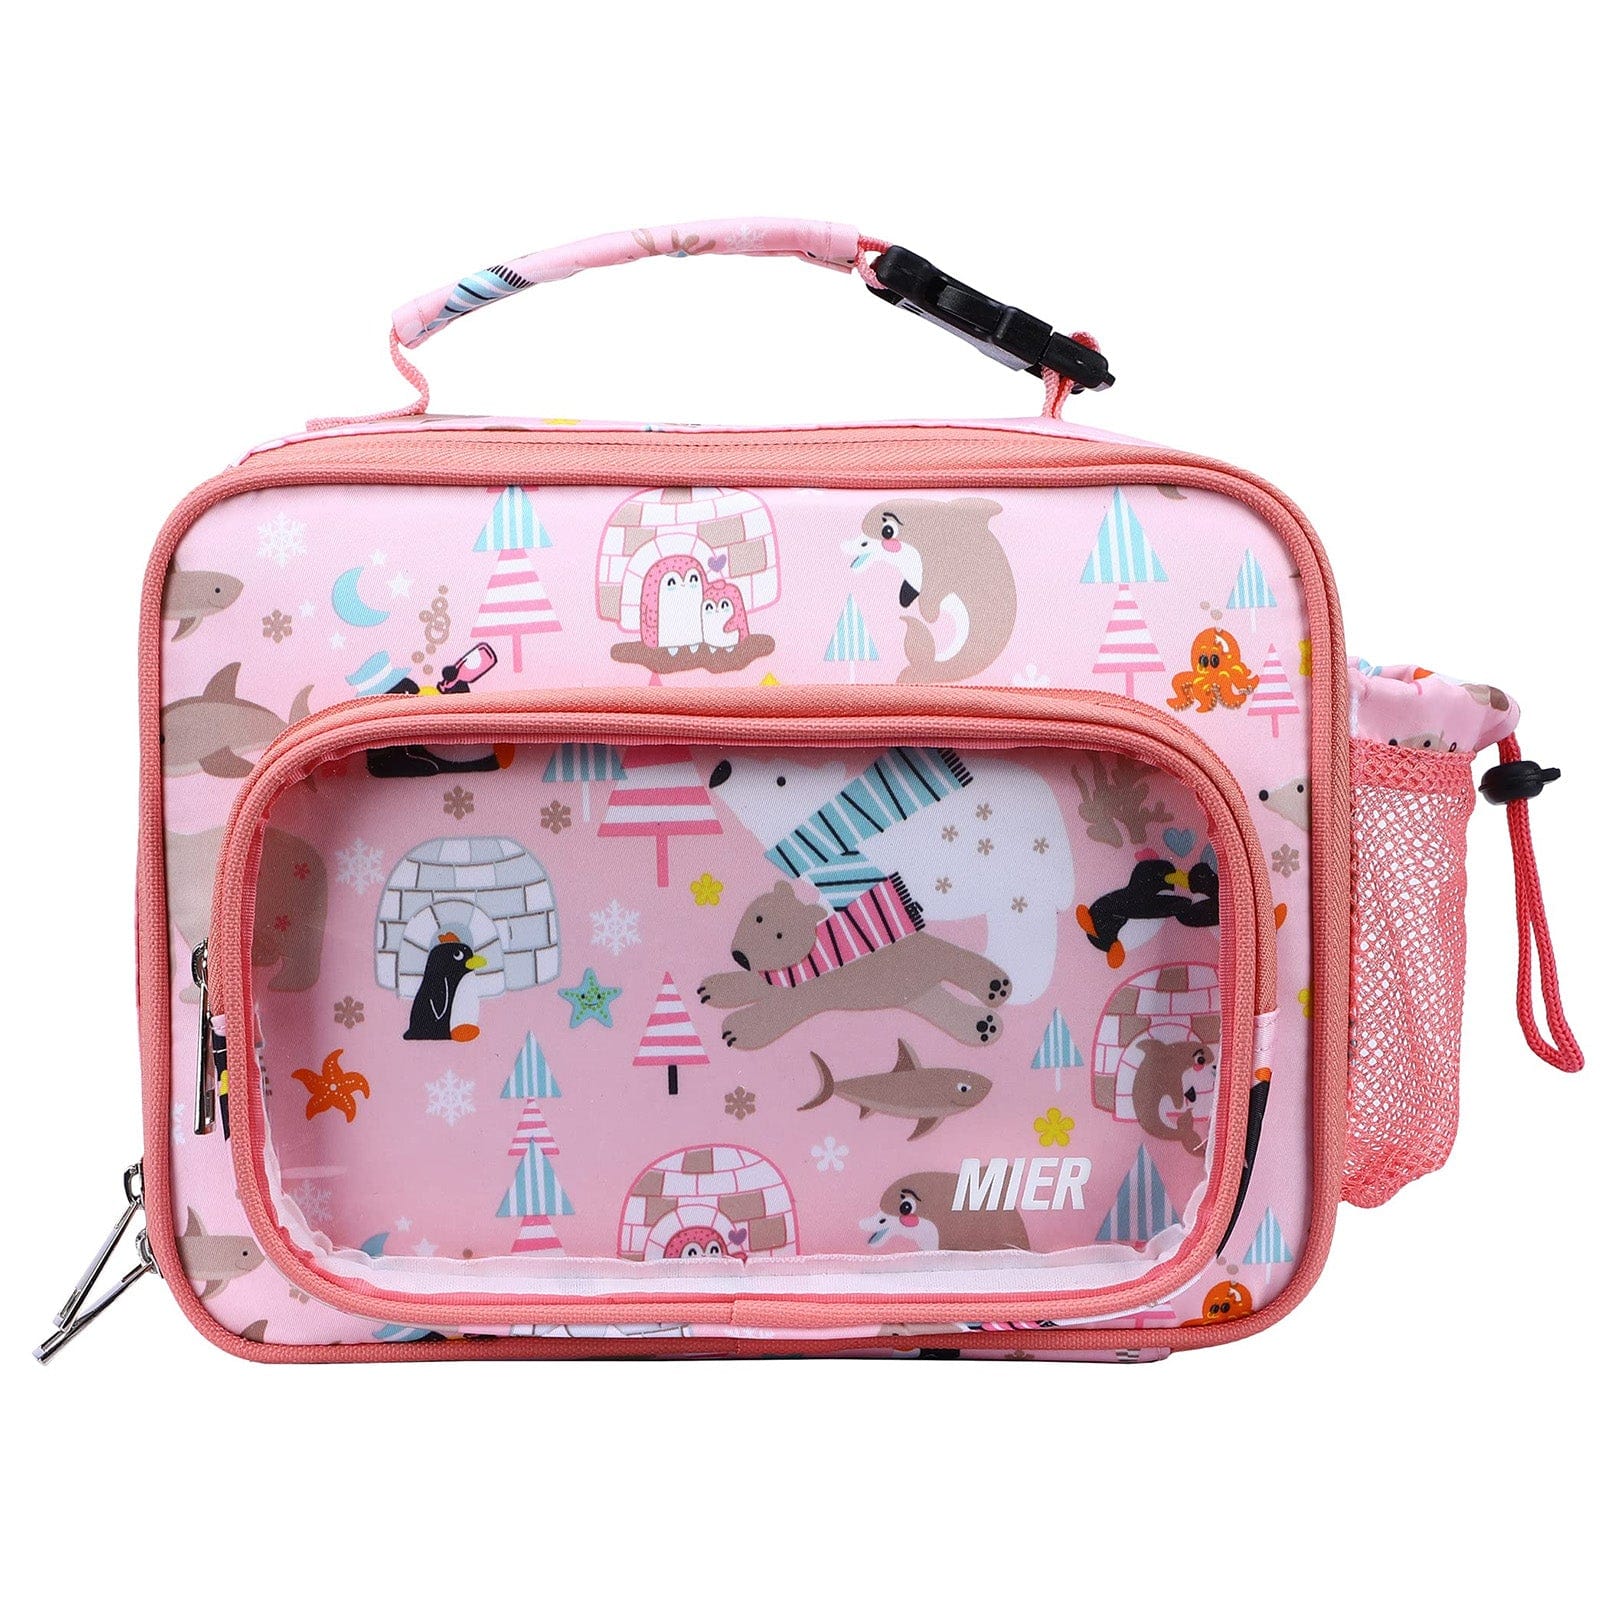 MIER Lunch Bags for Kids Cute Insulated Lunch Box Tote, Pink Marine Animals